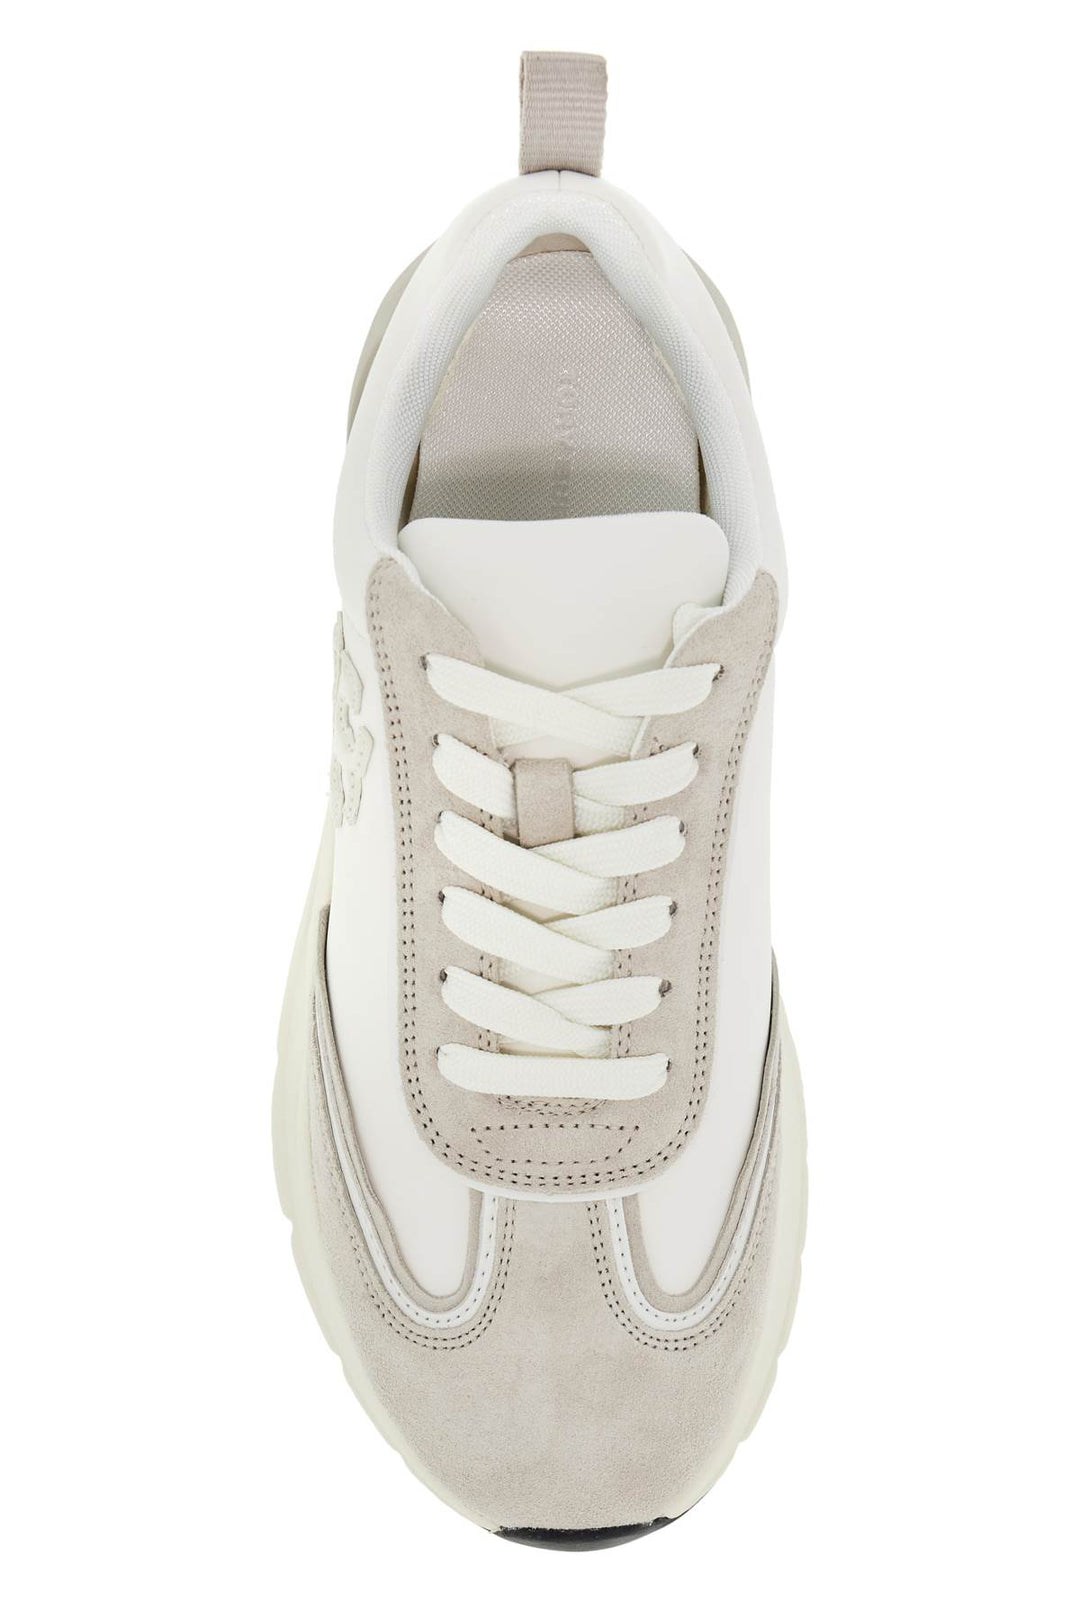 Tory Burch Good Luck Sneakers   White